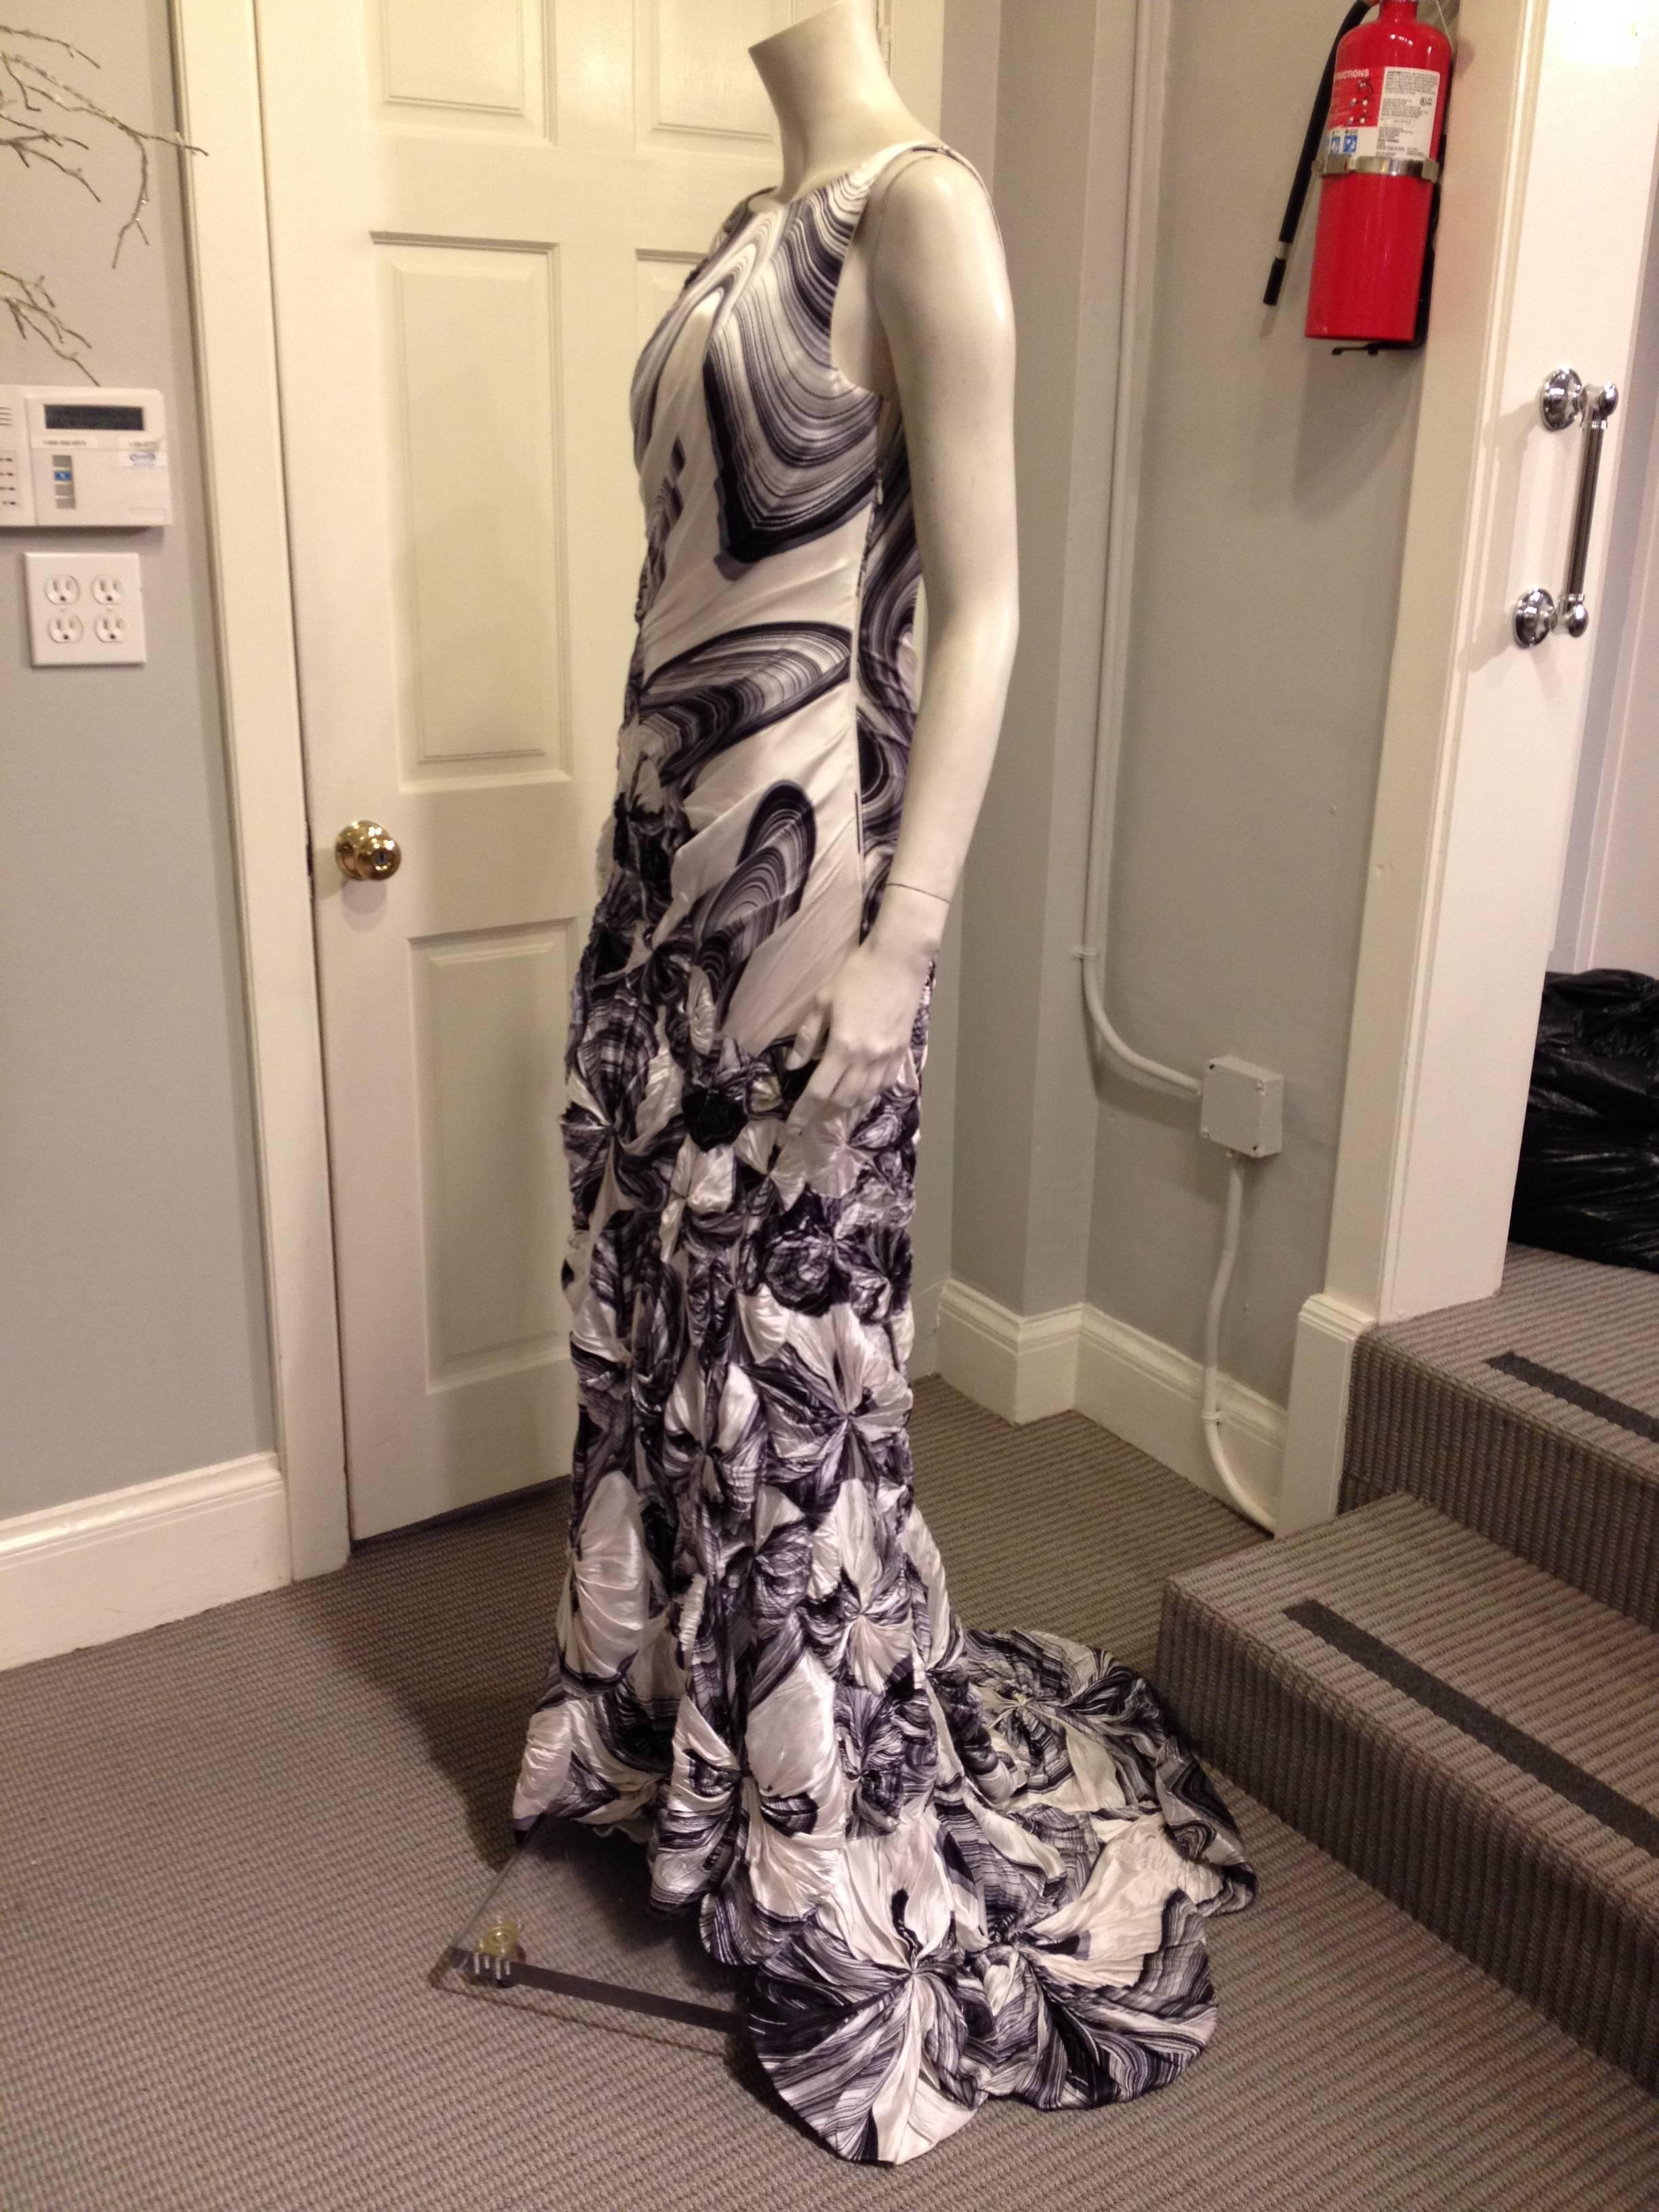 The sheer originality of this gown is breathtaking! The silk material is printed with the most gorgeous pattern of swirling lines, a design that feels both organic in movement and computer-based in its pixellation. The design is echoed in the